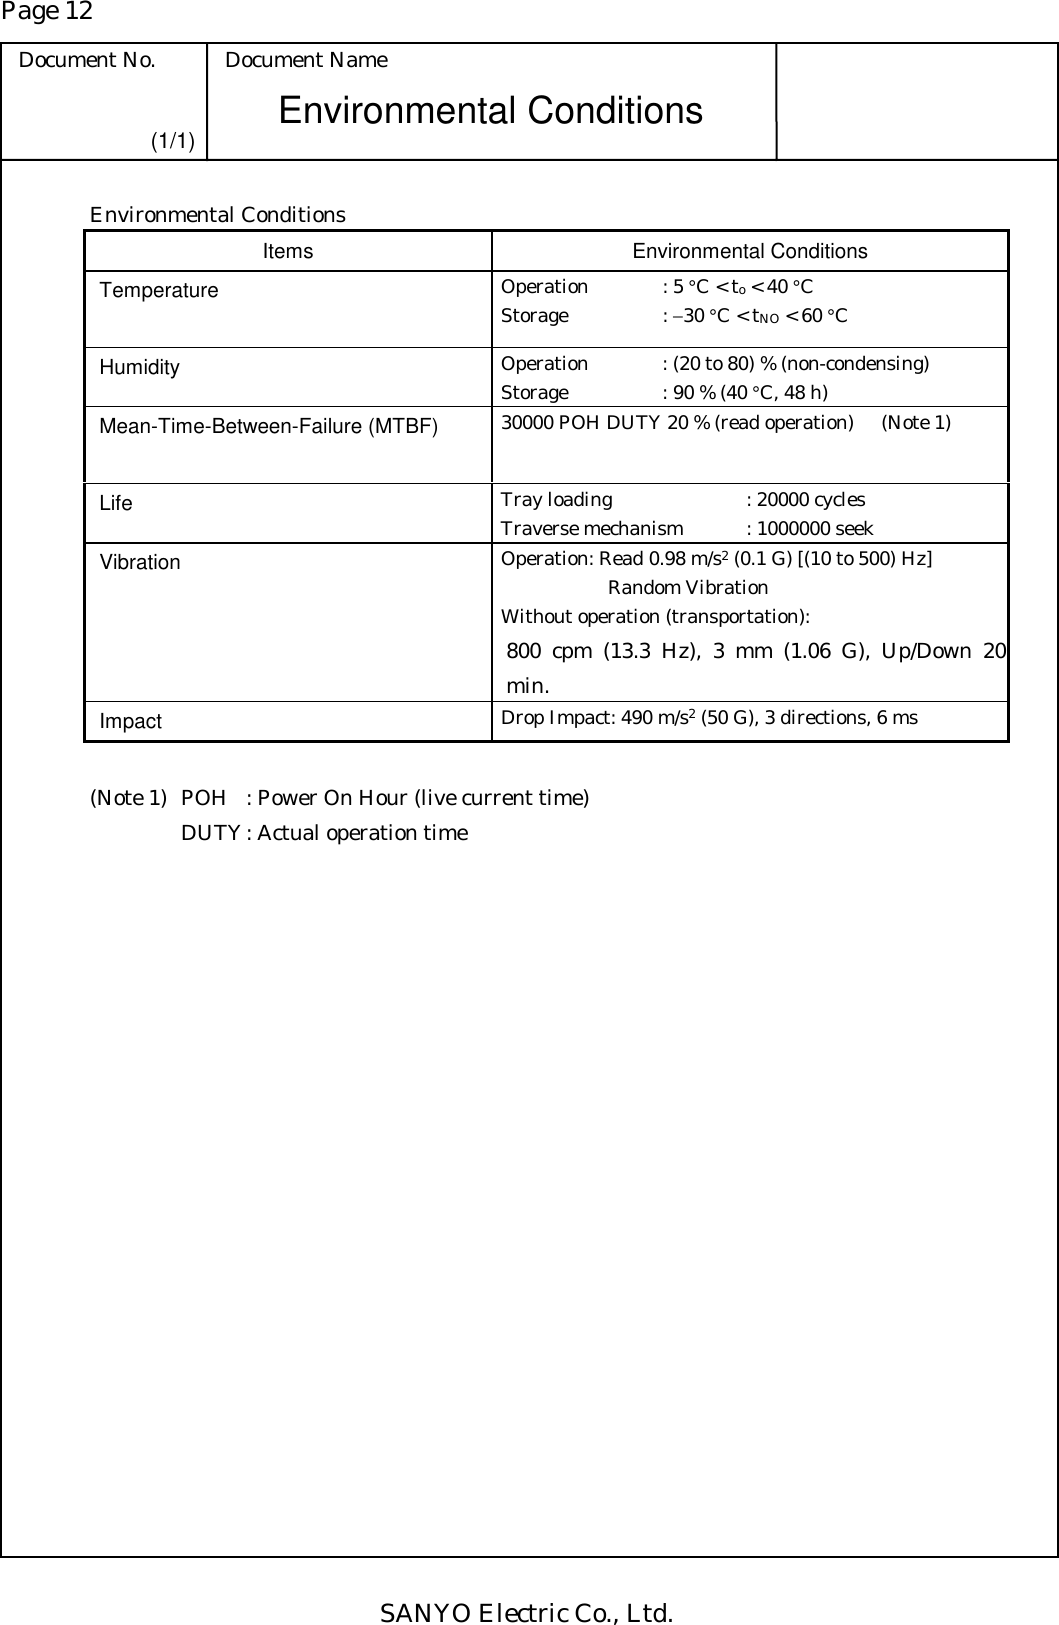 Page 12 Document No.  Document Name SANYO Electric Co., Ltd. Environmental Conditions (1/1) Environmental Conditions Items Environmental Conditions Temperature  Operation : 5 °C &lt; to &lt; 40 °C Storage   : −30 °C &lt; tNO &lt; 60 °C Humidity  Operation  : (20 to 80) % (non-condensing) Storage    : 90 % (40 °C, 48 h) Mean-Time-Between-Failure (MTBF)  30000 POH DUTY 20 % (read operation)  (Note 1) Life  Tray loading    : 20000 cycles Traverse mechanism  : 1000000 seek Vibration  Operation: Read 0.98 m/s2 (0.1 G) [(10 to 500) Hz] Random Vibration Without operation (transportation): 800 cpm (13.3 Hz), 3 mm (1.06 G), Up/Down 20 min. Impact  Drop Impact: 490 m/s2 (50 G), 3 directions, 6 ms  (Note 1)  POH   : Power On Hour (live current time)          DUTY : Actual operation time 